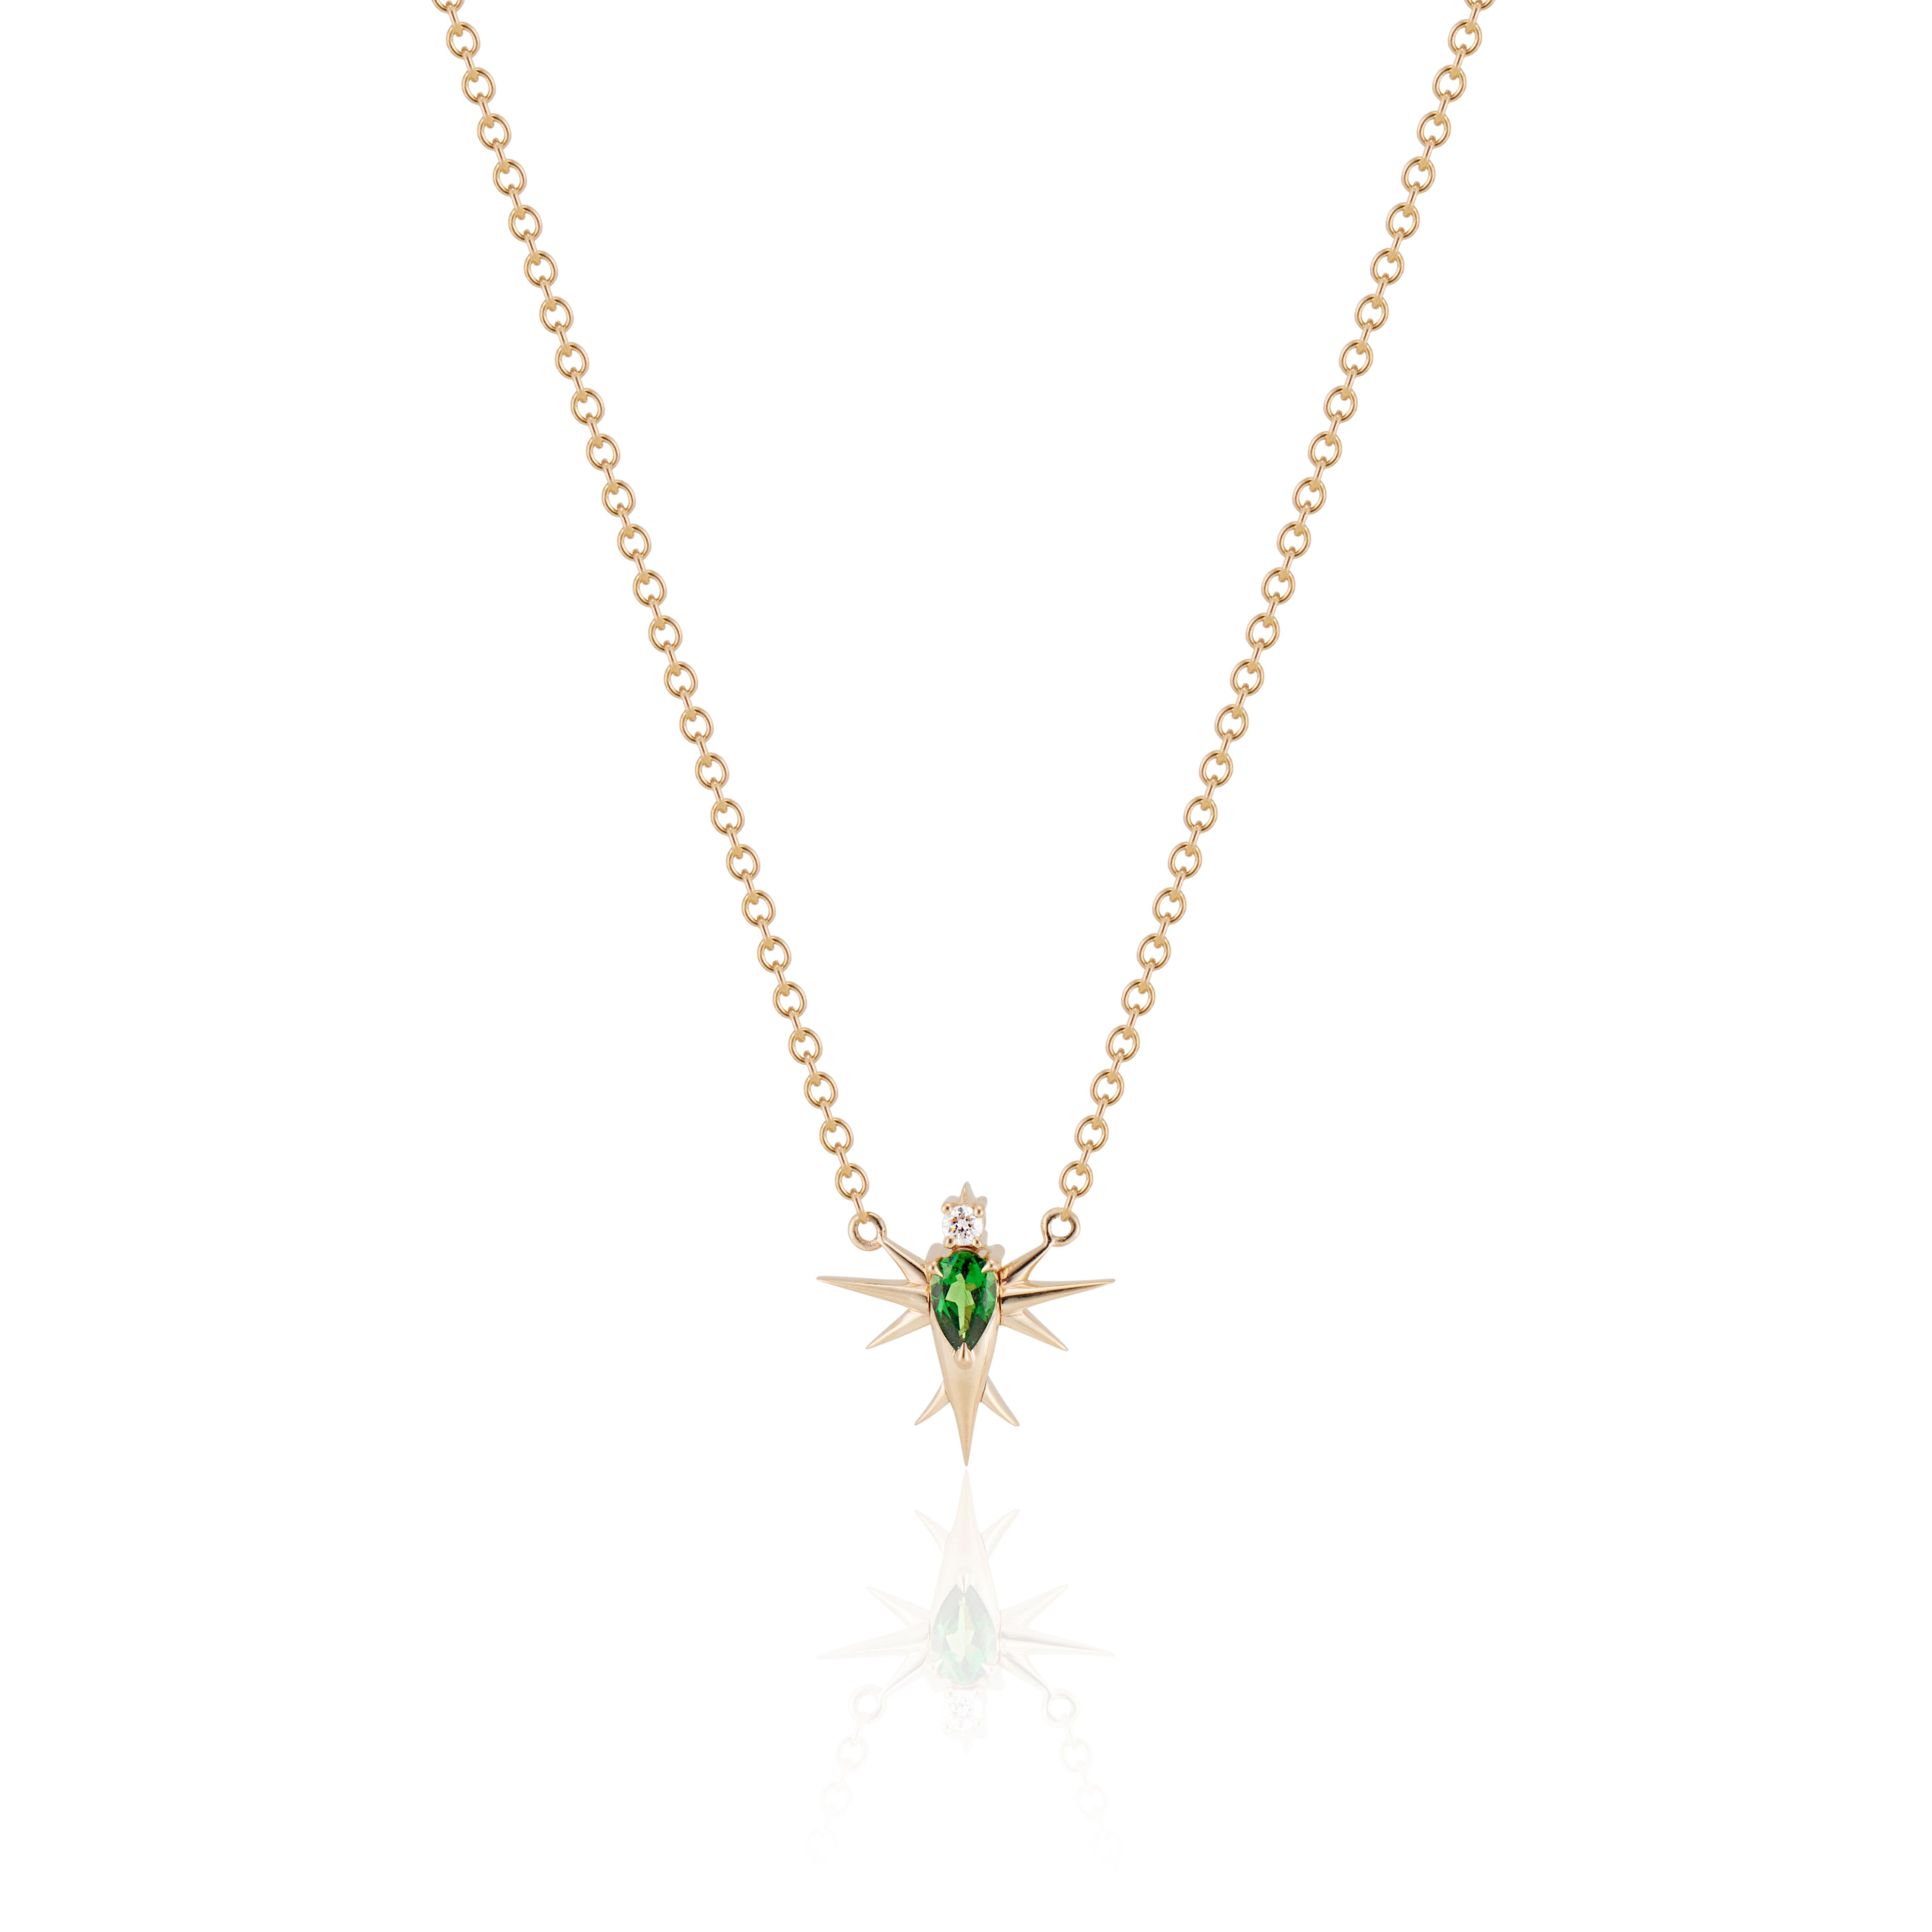 14ct Yellow Gold - Tsavorite And Diamond Bird Necklace by Harlin Jones
*This item is in stock and ready to ship
*This item is customizable, inquire with storefront on details and leadtime

- Adjustable Cable Chain - Longest at 18inches (45cm)
-